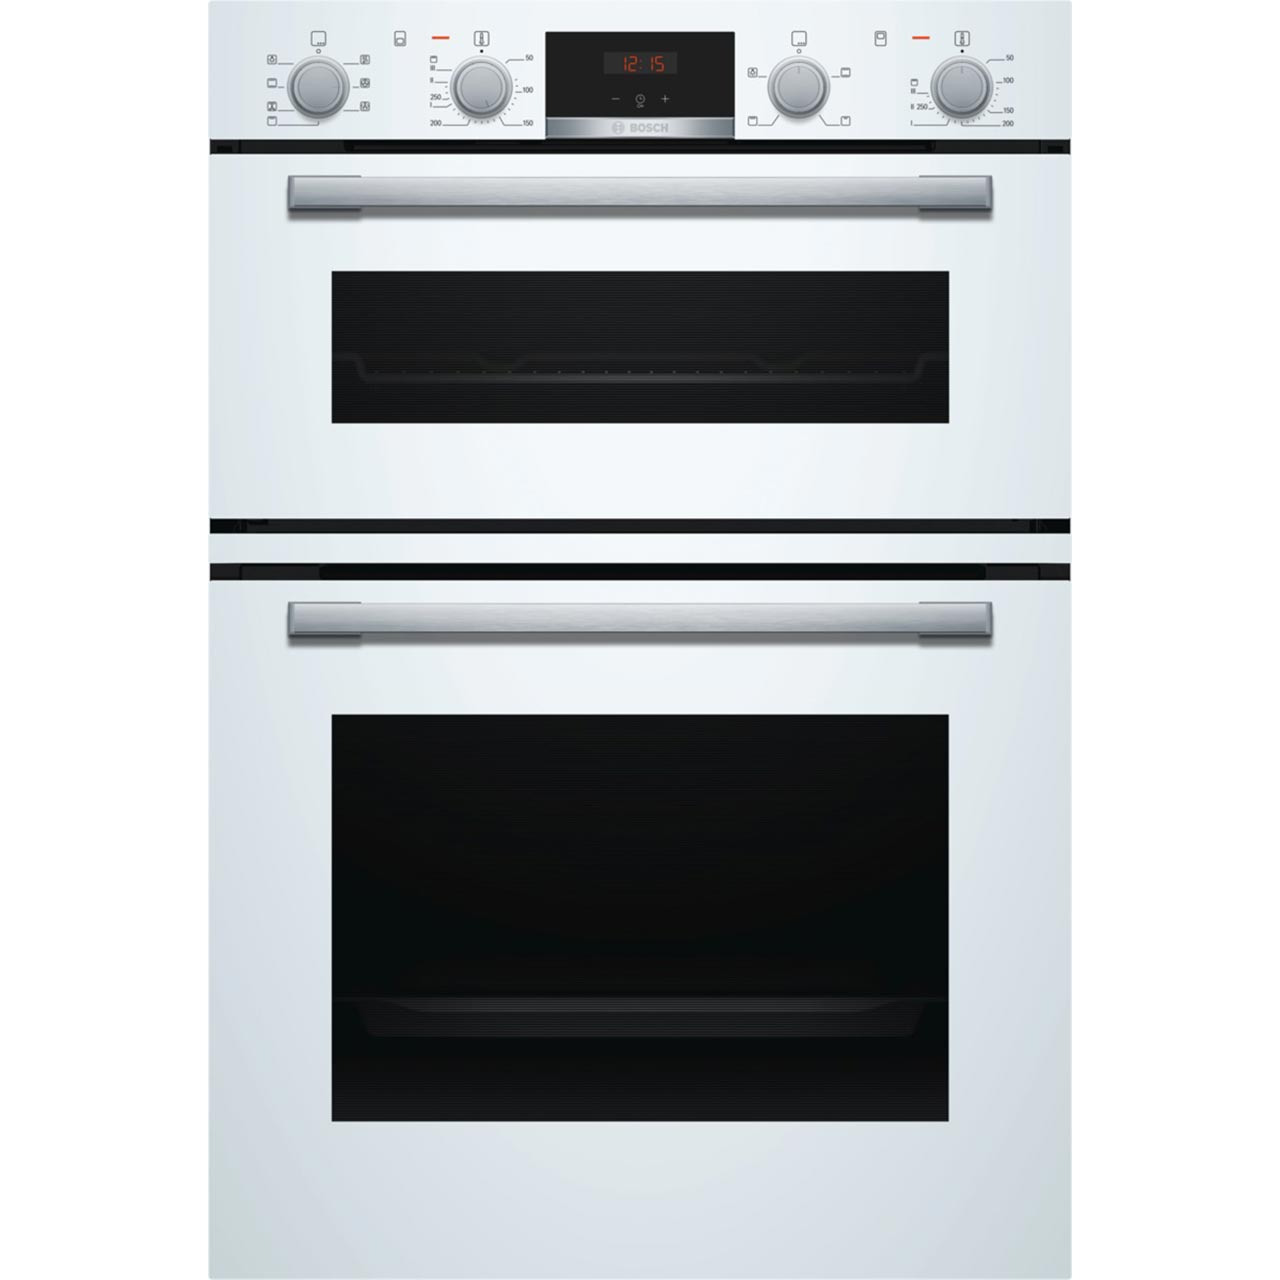 Bosch Series 4 MBS533BW0B Built In Electric Double Oven - White - A/B Rated, White